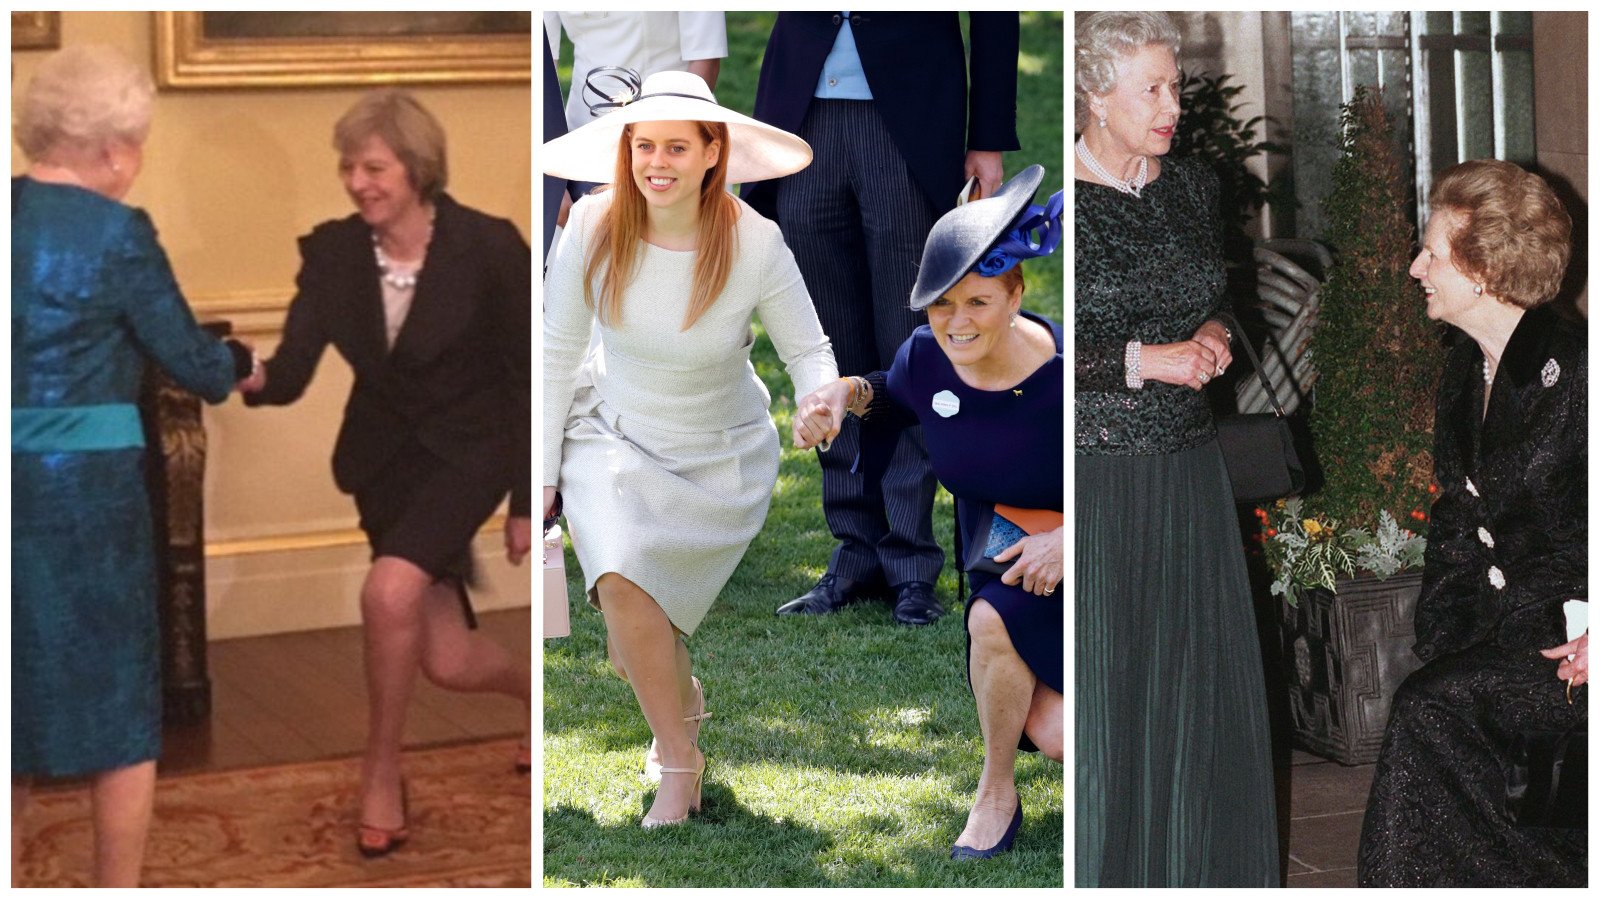 The British royal website suggests curtsying upon meeting the queen, but Theresa May, Princess Beatrice and Eugenie, and Margaret Thatcher are far from experts at it. Photos: @iamamoum/Twitter, Getty Images, PA Images via Getty Images